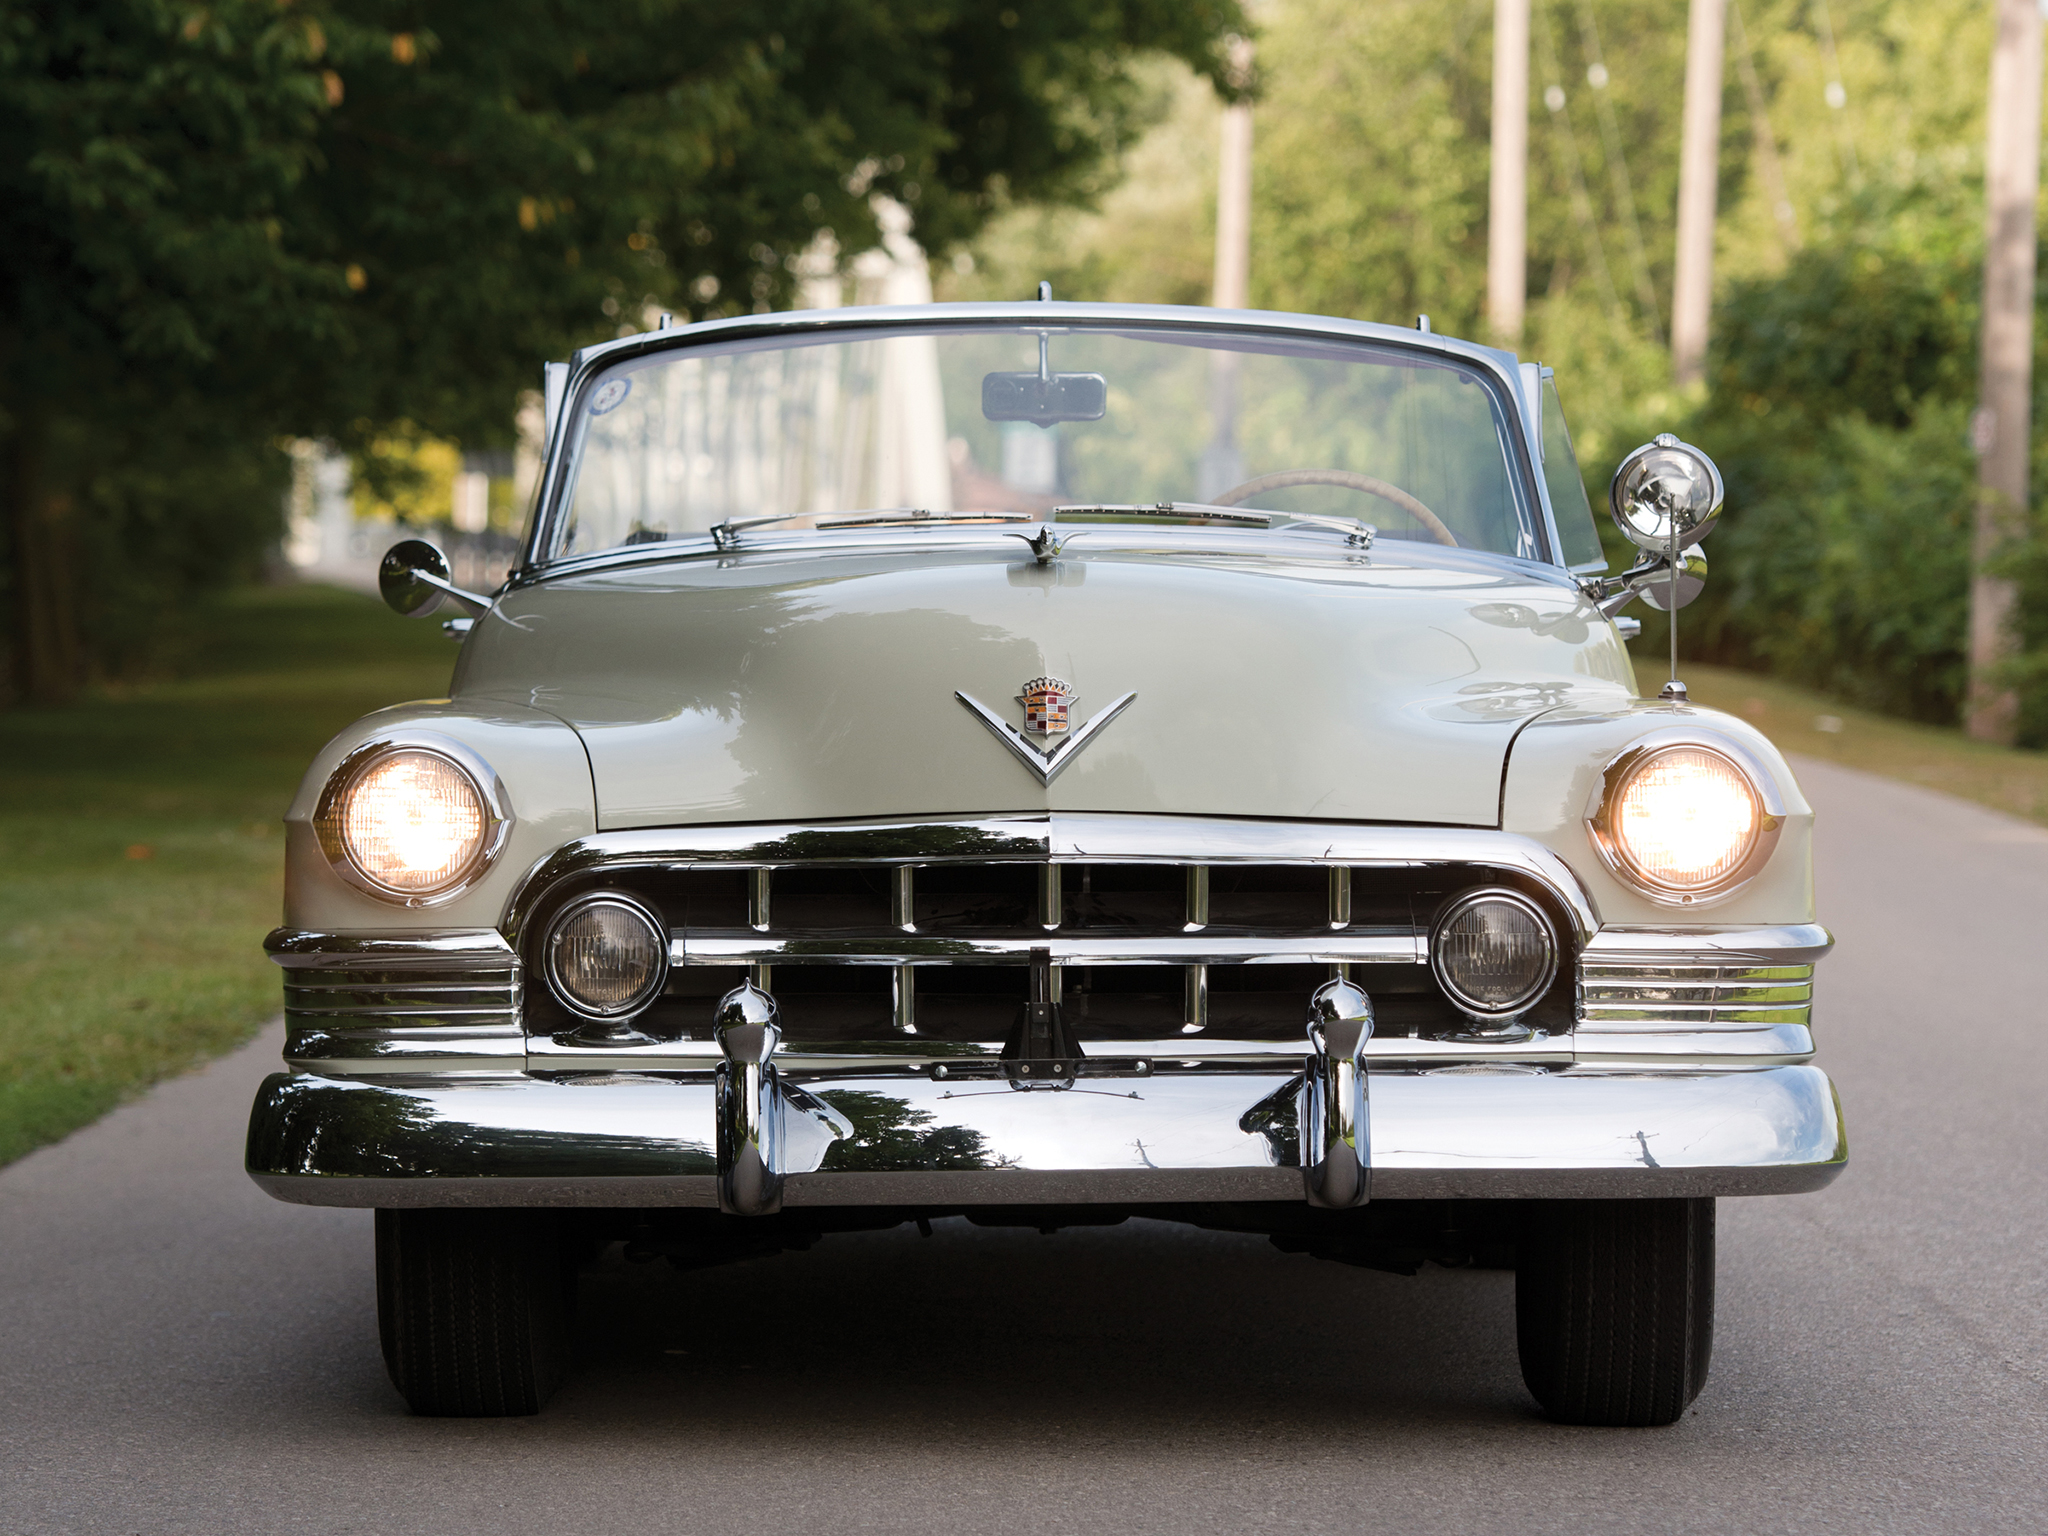 1950, Cadillac, Sixty two, Convertible, 6267, Luxury, Retro, Fe Wallpaper